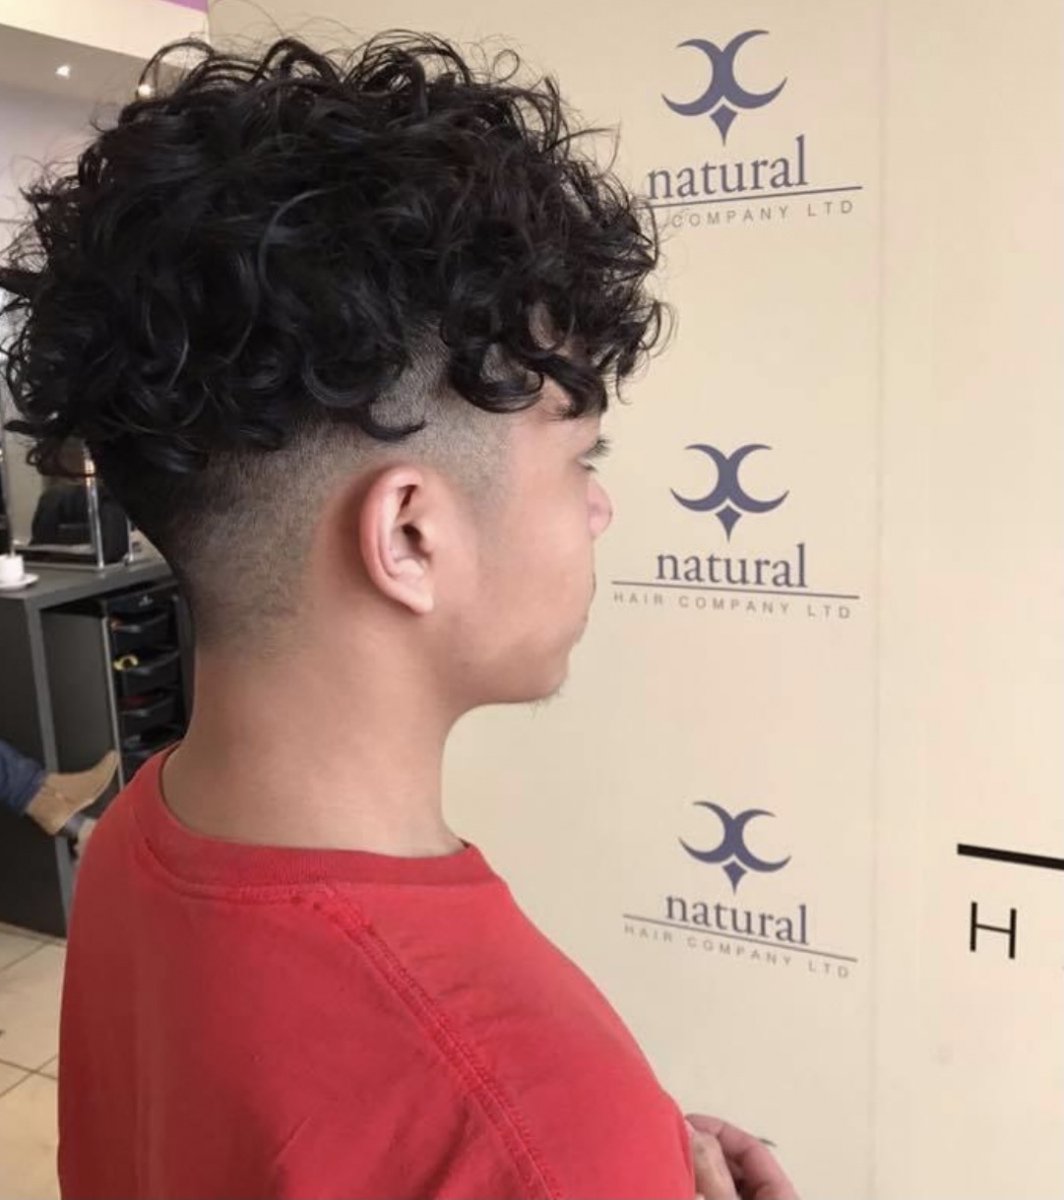 Trend Alert... Perms Are Back For Boys! - Natural Hair Company